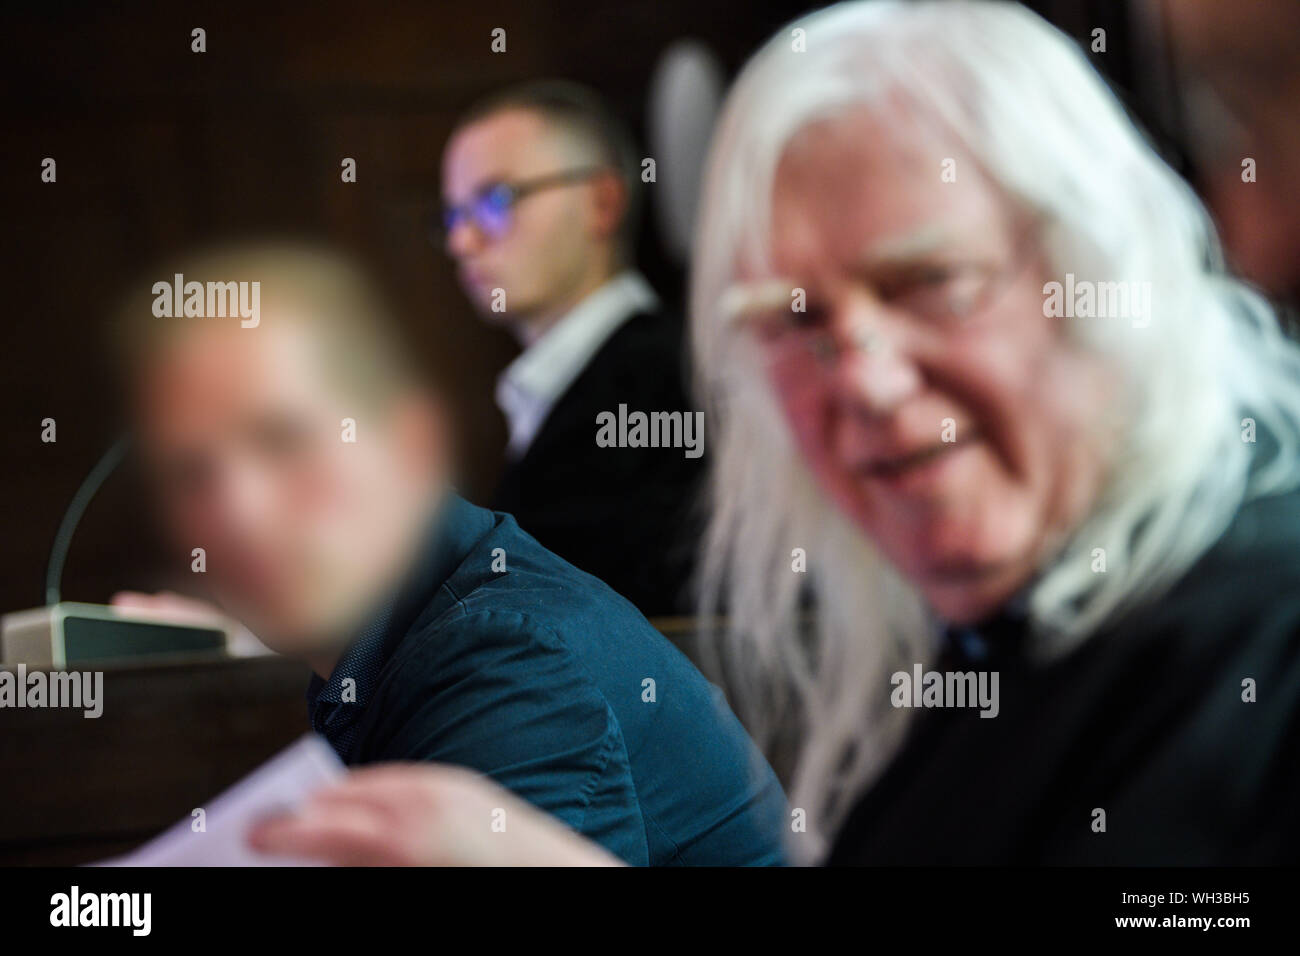 02 September 2019, Lower Saxony, Emden: The defendant (l) is sitting next to his defender Reinhard Nollmann in the courtroom shortly before the start of the trial. The tragic case had caused consternation in August 2016, when two boats, each with four young occupants, had driven together on the way back from the harbour festival in Barßel. A skipper is said to have been drunk with 1.89 per mille and to have driven too fast. After years of wrangling over jurisdiction, the Federal Supreme Court referred the case to Emden. Seven witnesses have been summoned for the sole day of the trial. Parts of Stock Photo